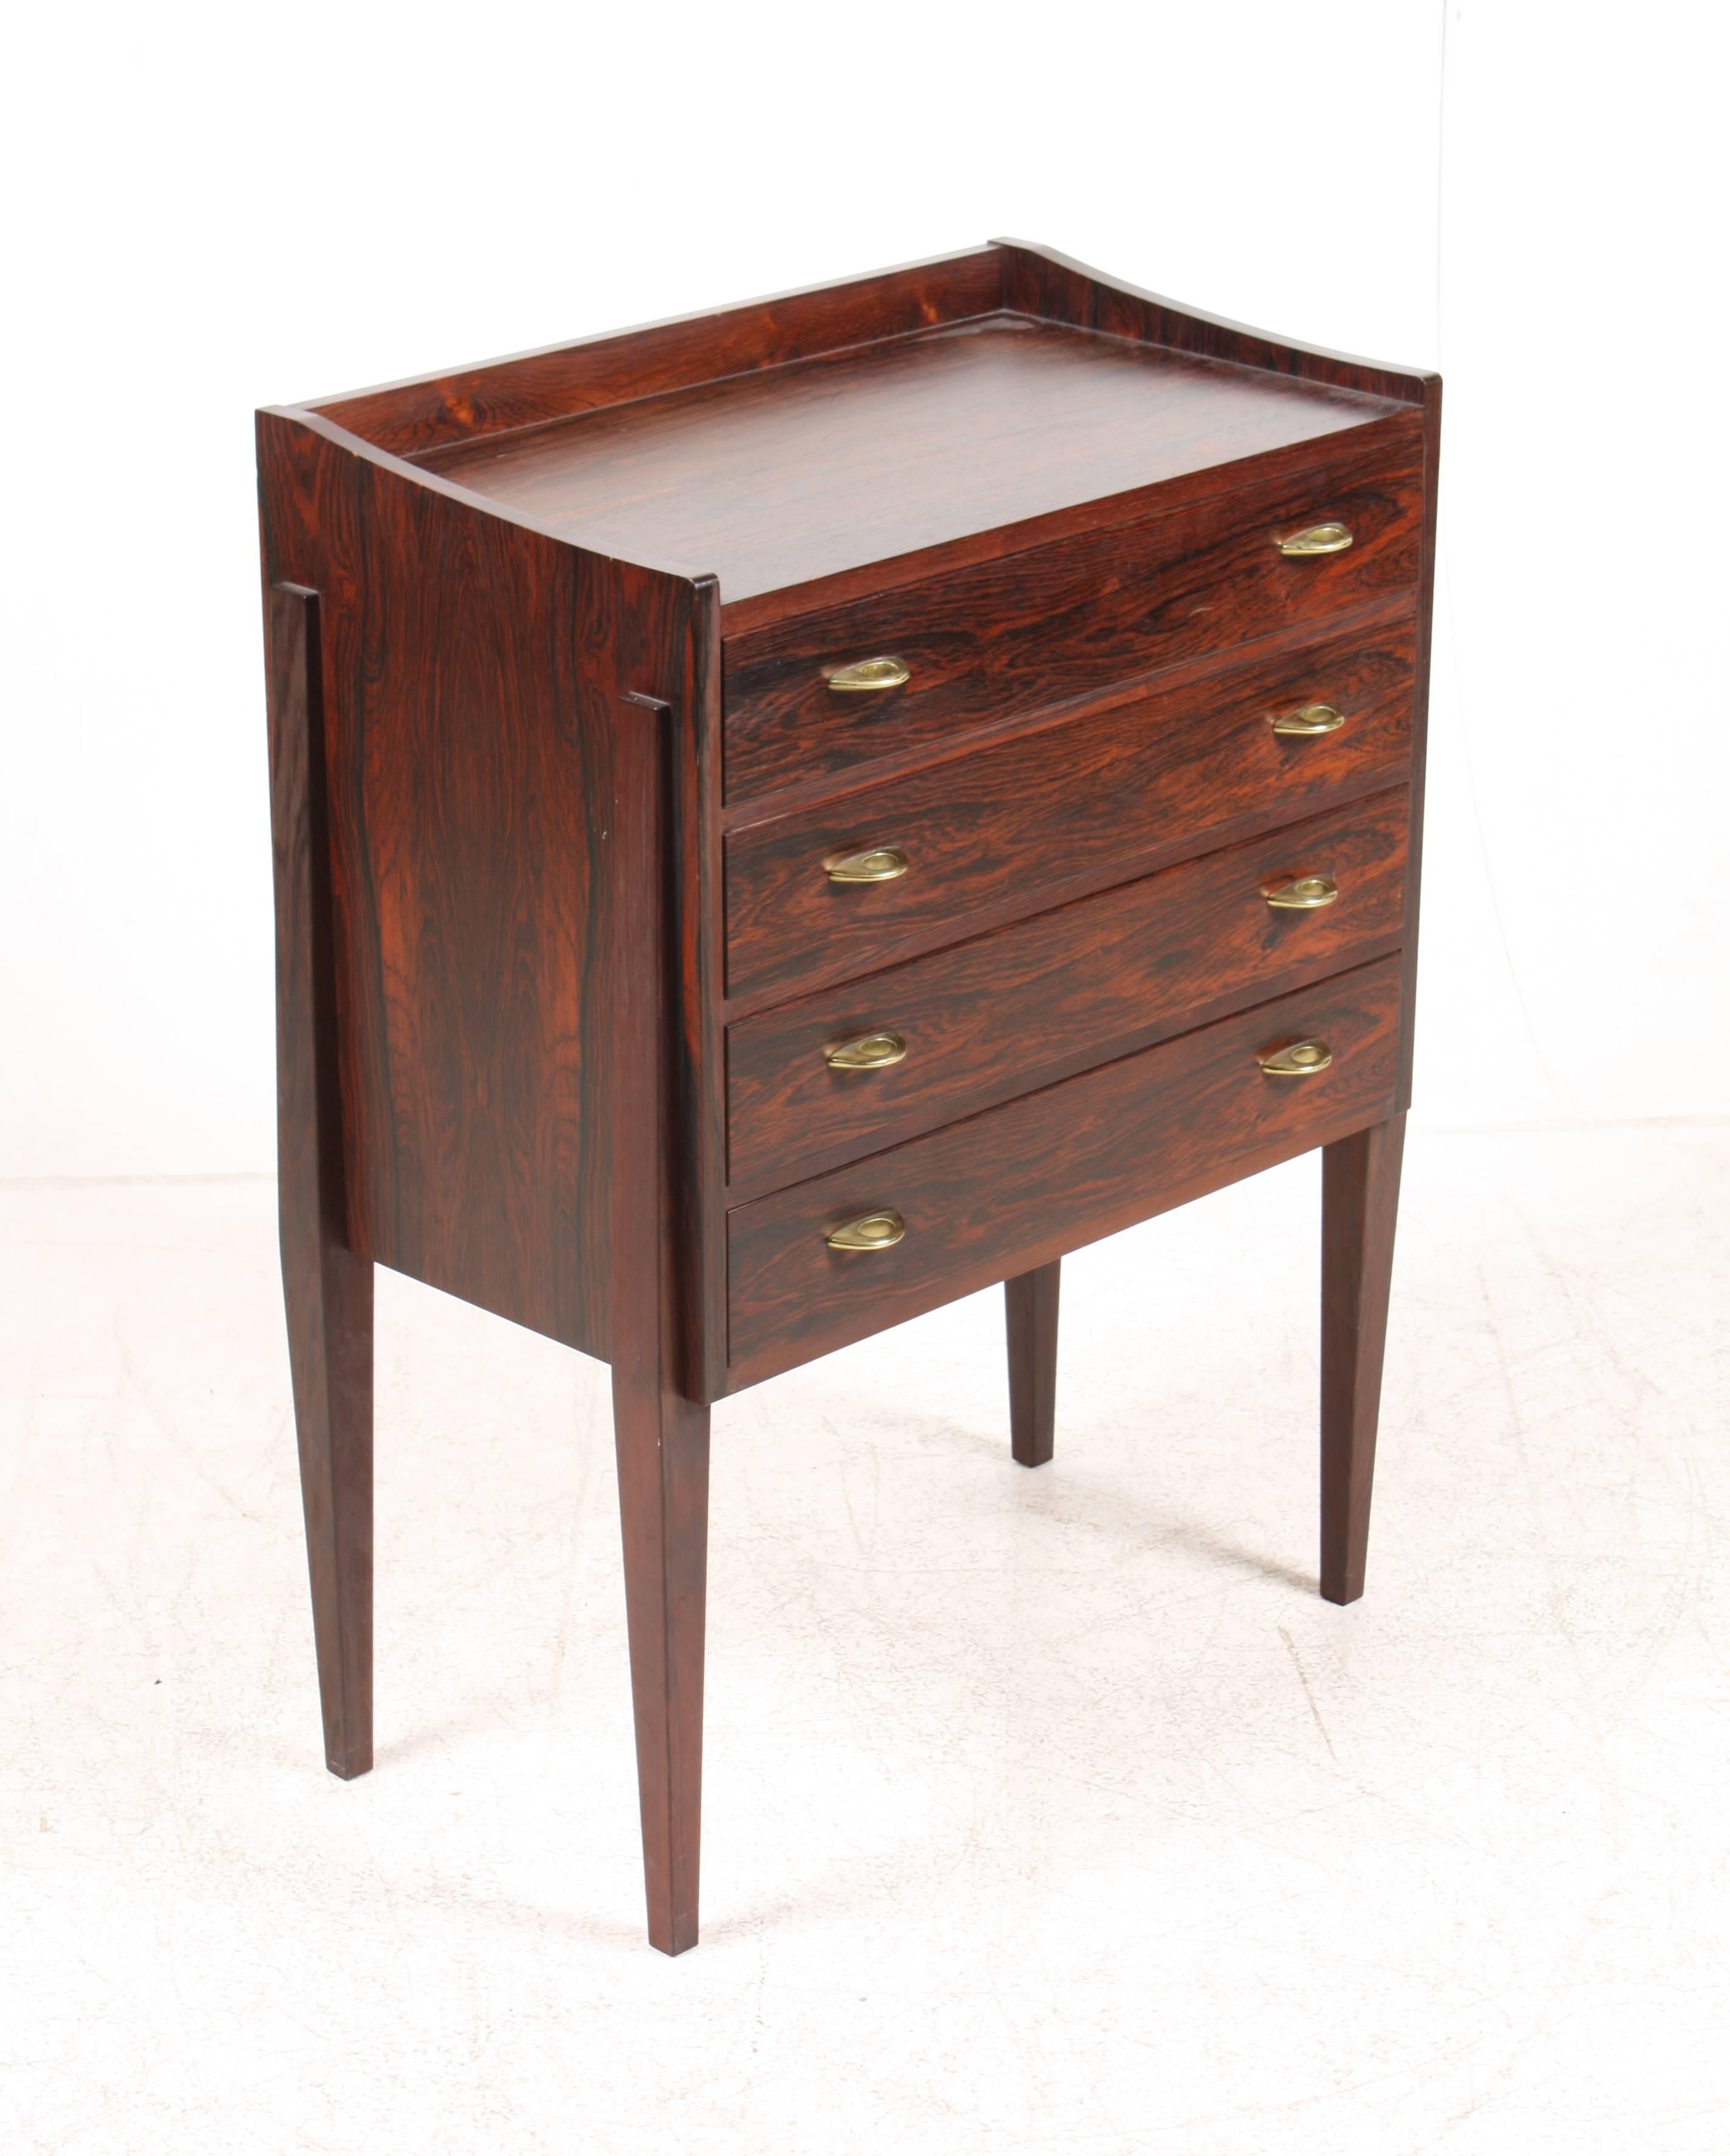 Elegant chest of drawers in rosewood with hardware in brass designed by Frode Holm for Illums Bolighus in the 1950s. Great original condition.